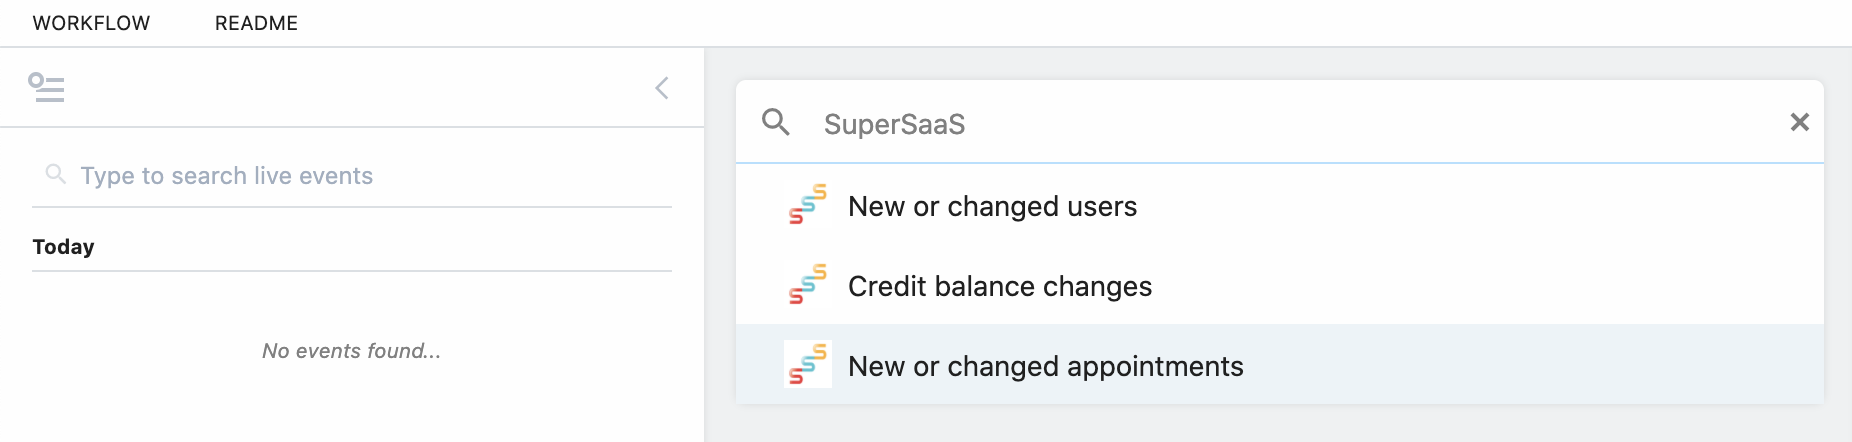 Pipedream’s New Workflow page showing SuperSaaS trigger options